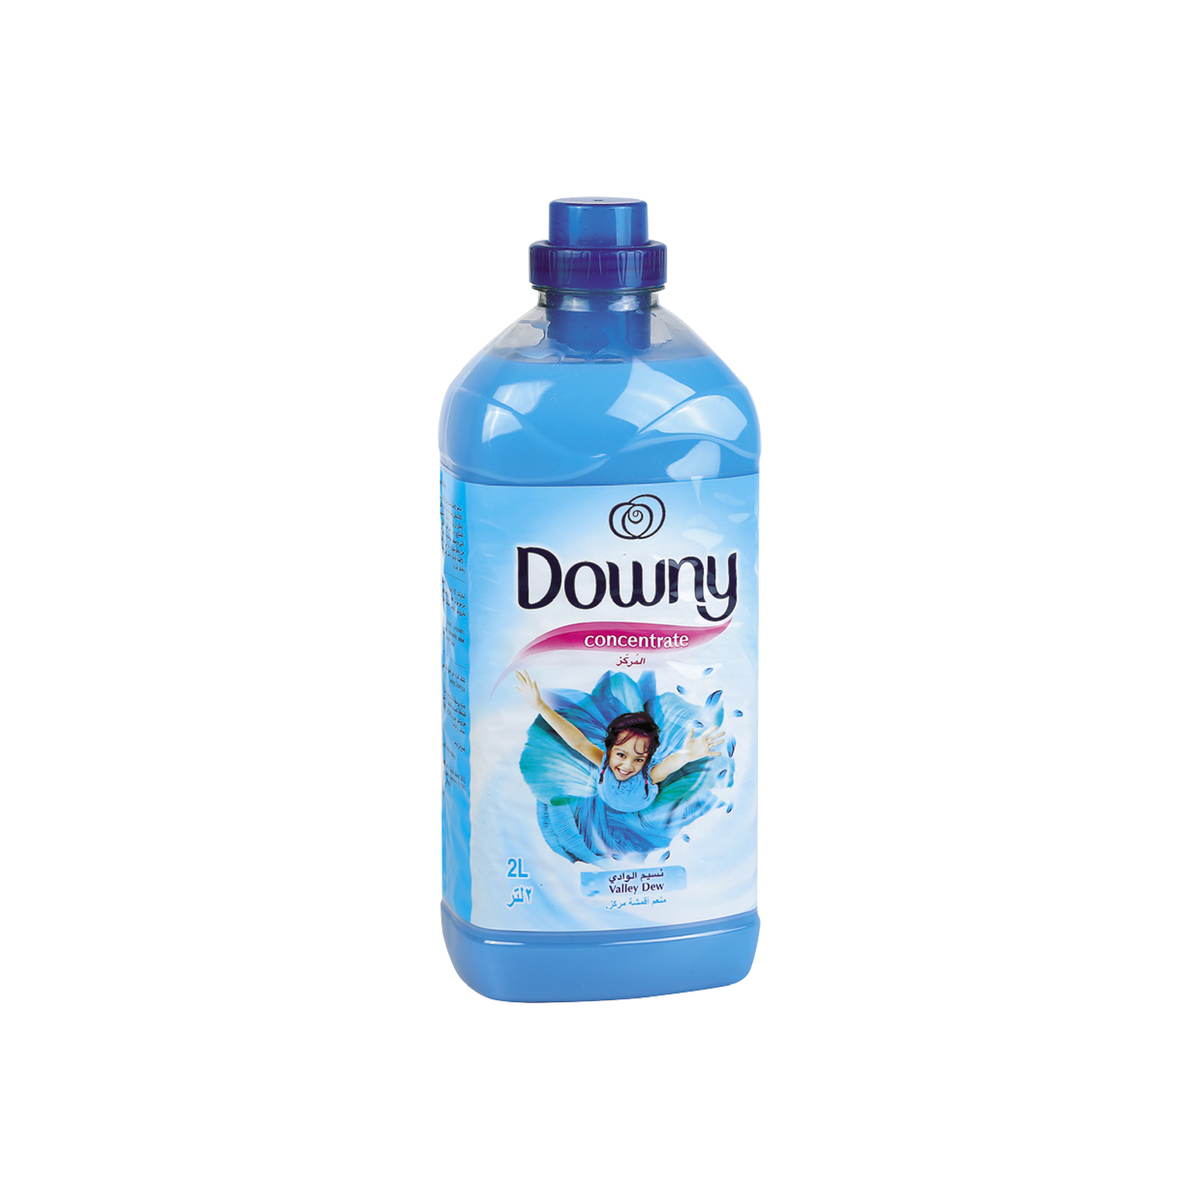 Downy Fabric Softener Concentrate Valley Dew 2Litre